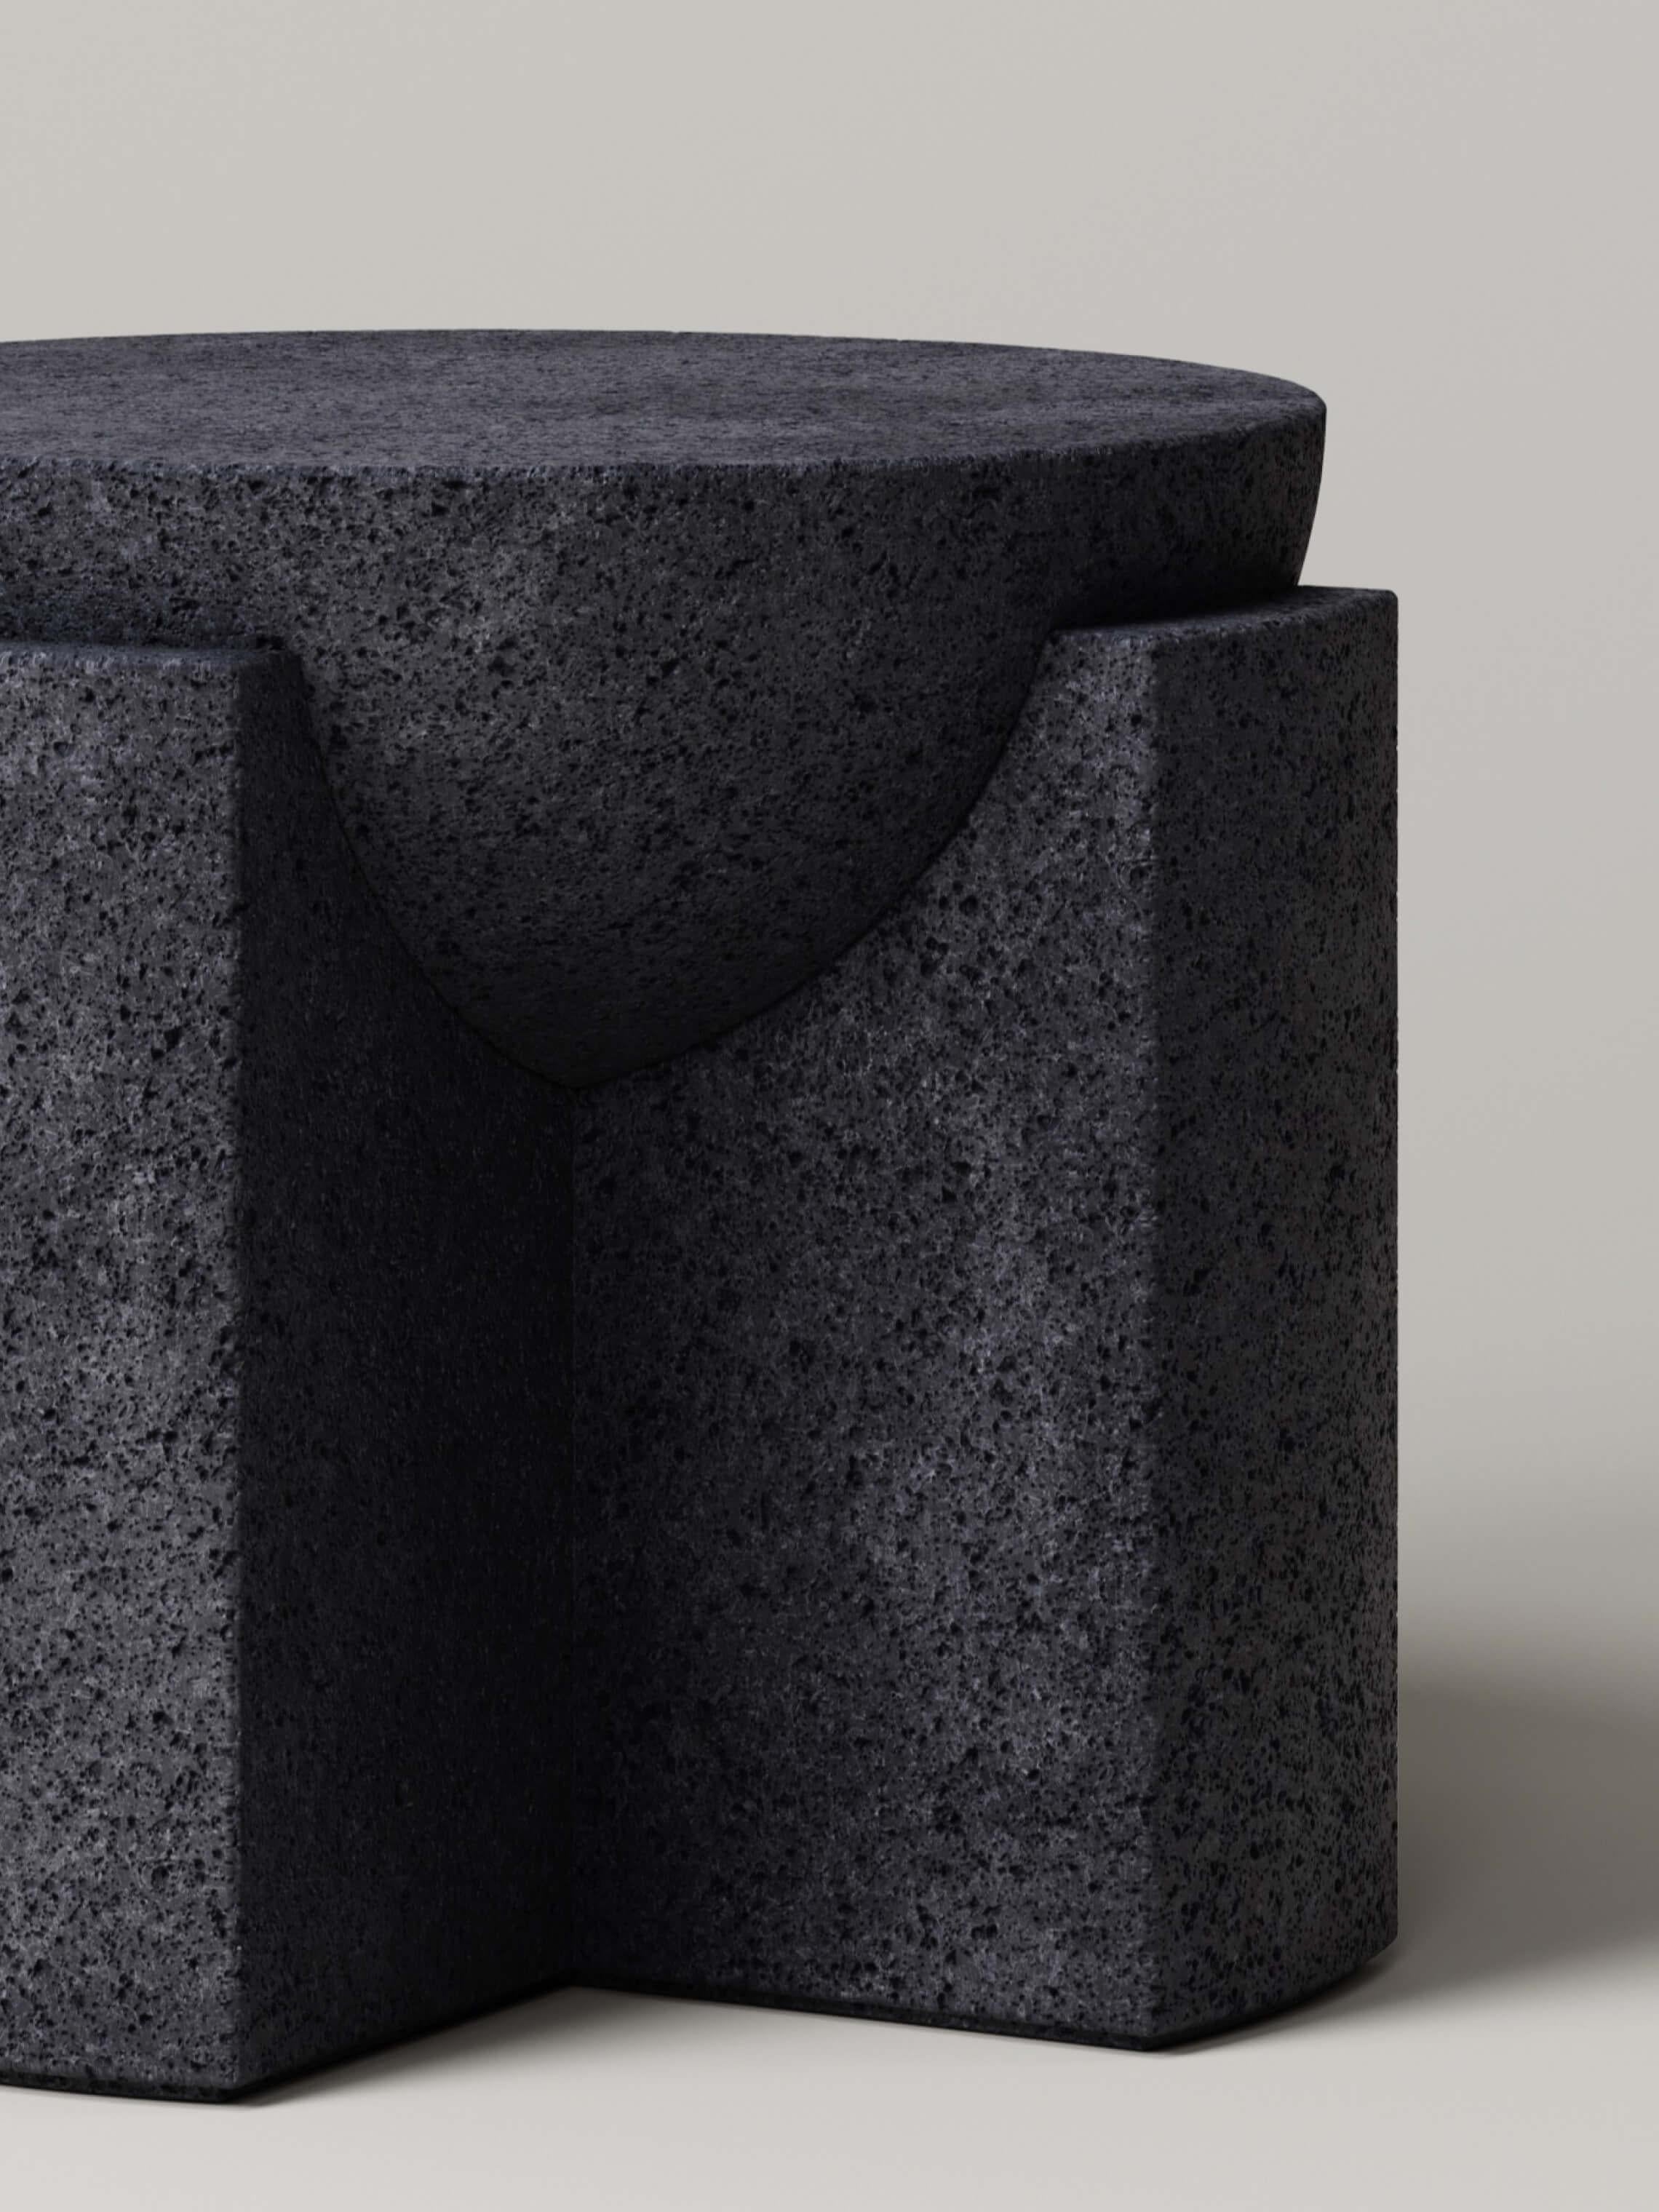 Carved M_002 Side Table designed by Studio Le Cann for Monolith Studio, Lava Rock For Sale